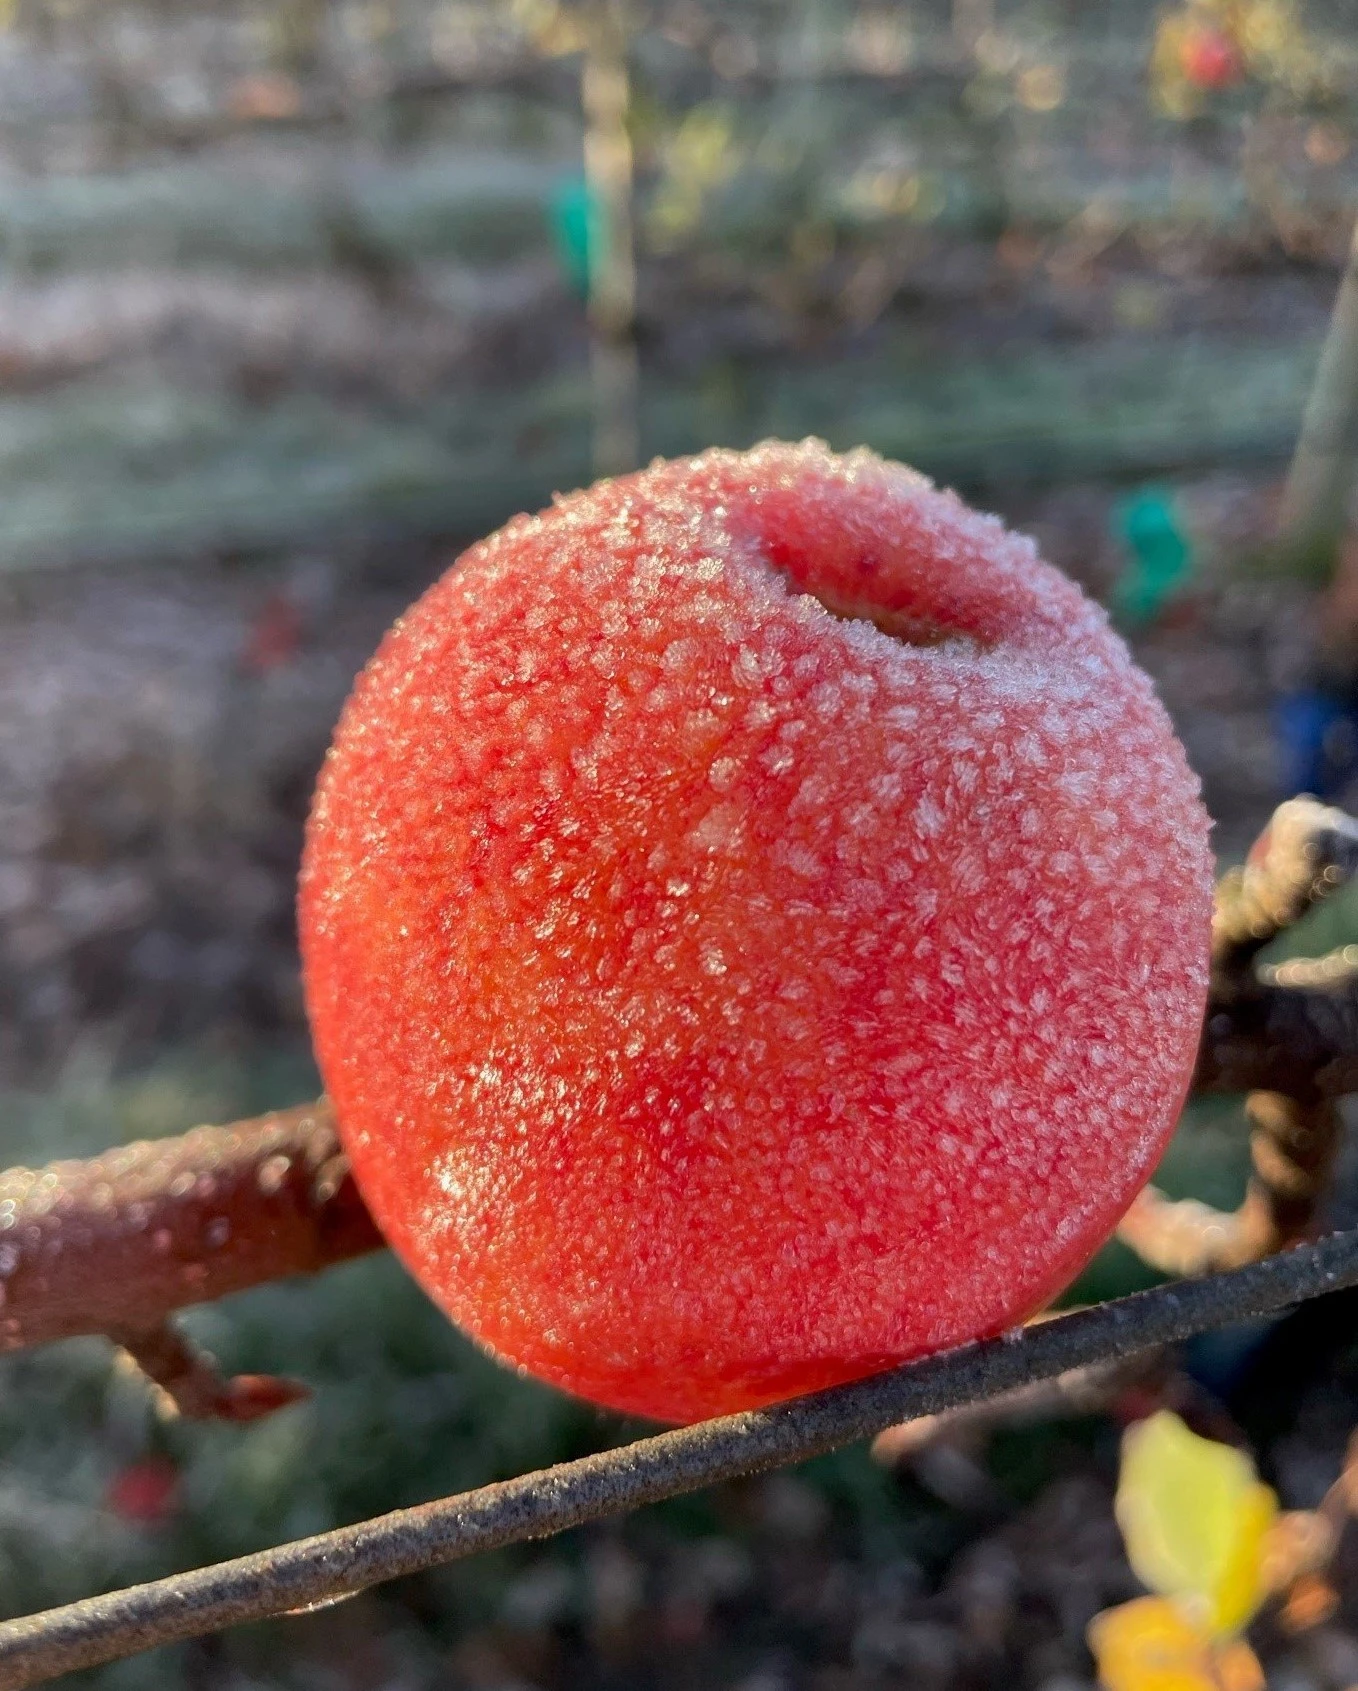 Red apple with frost on it